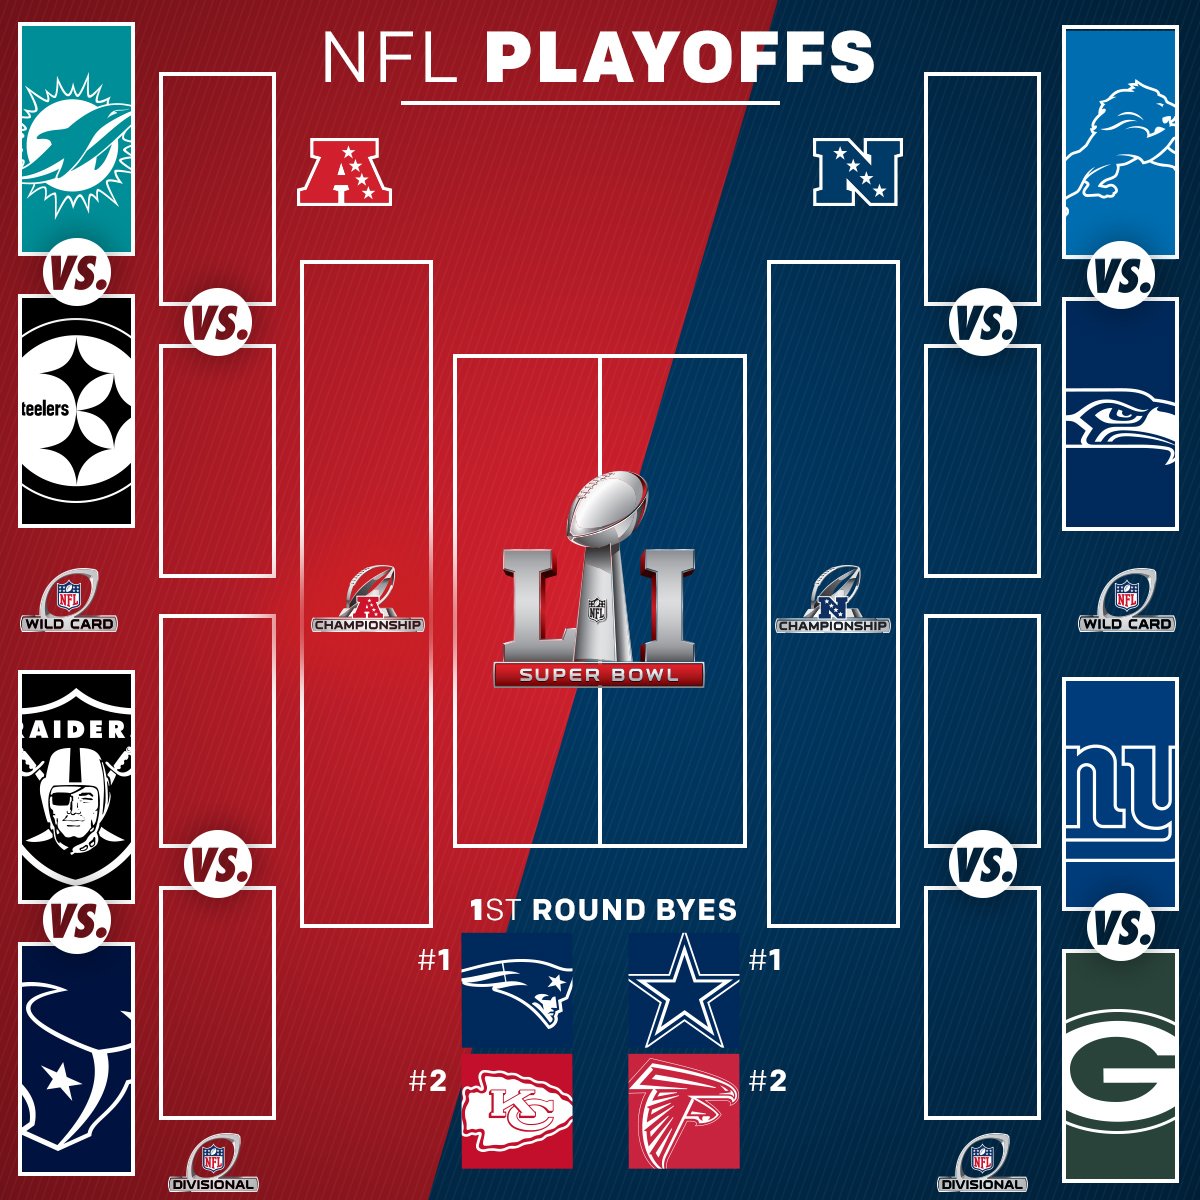 NFL on Twitter: "The Playoff Picture is official. #NFLPlayoffs…